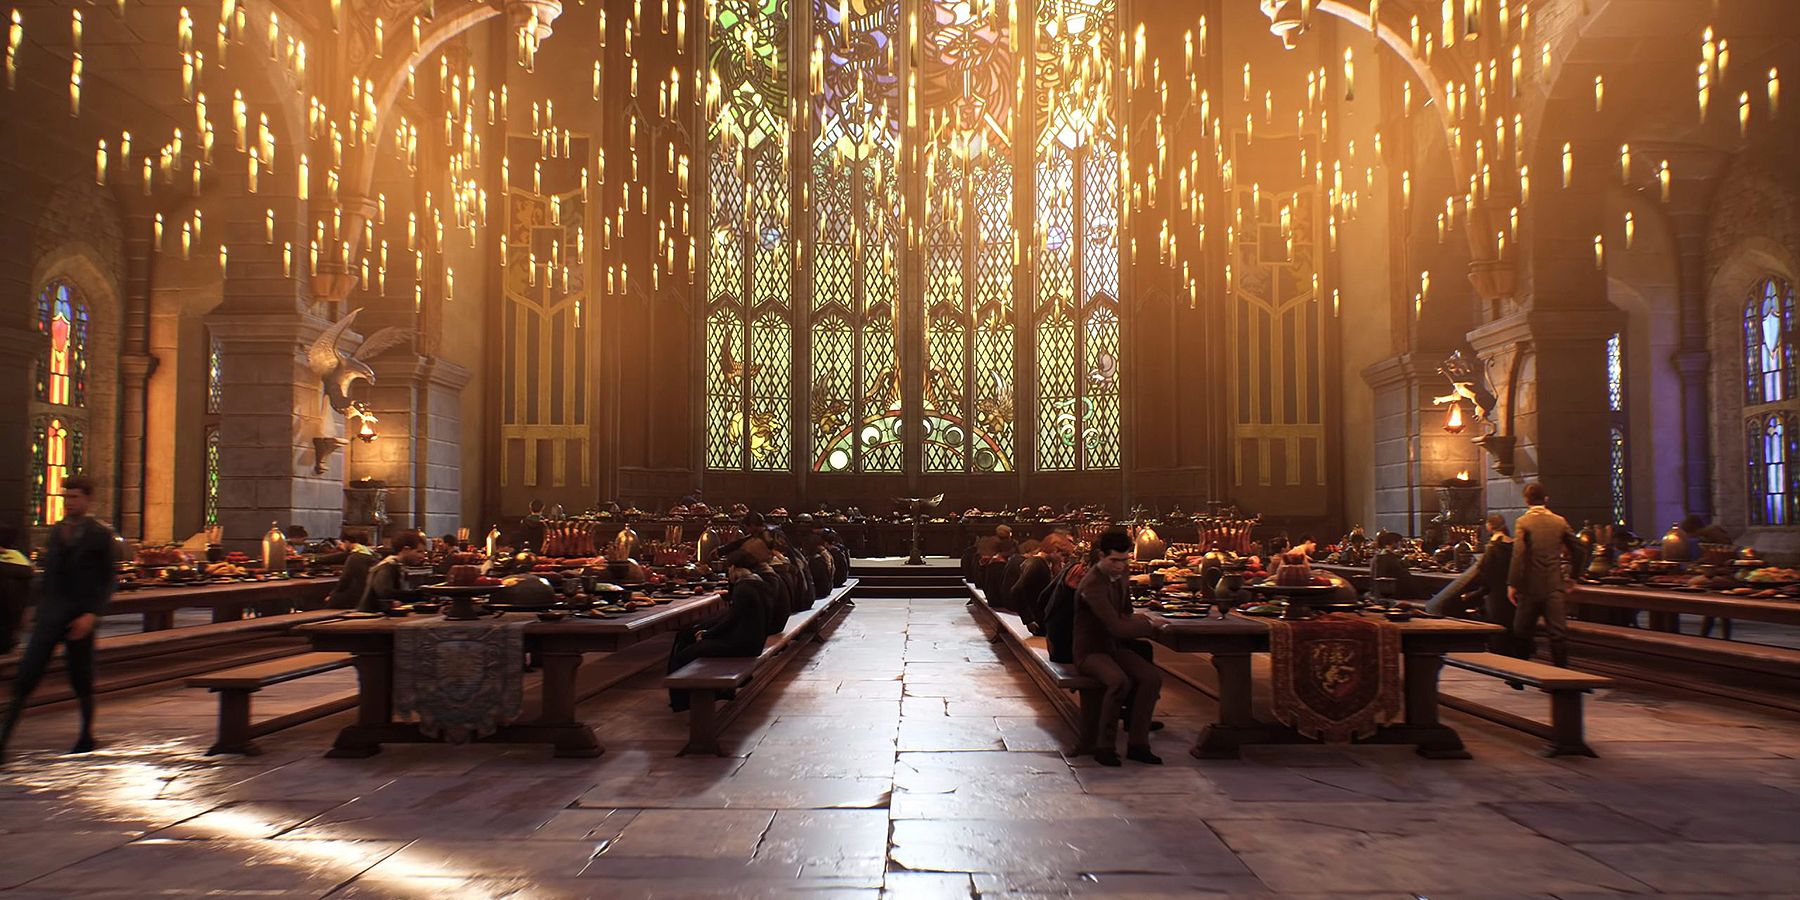 hogwarts legacy fans number of students attending theory common rooms dormitories